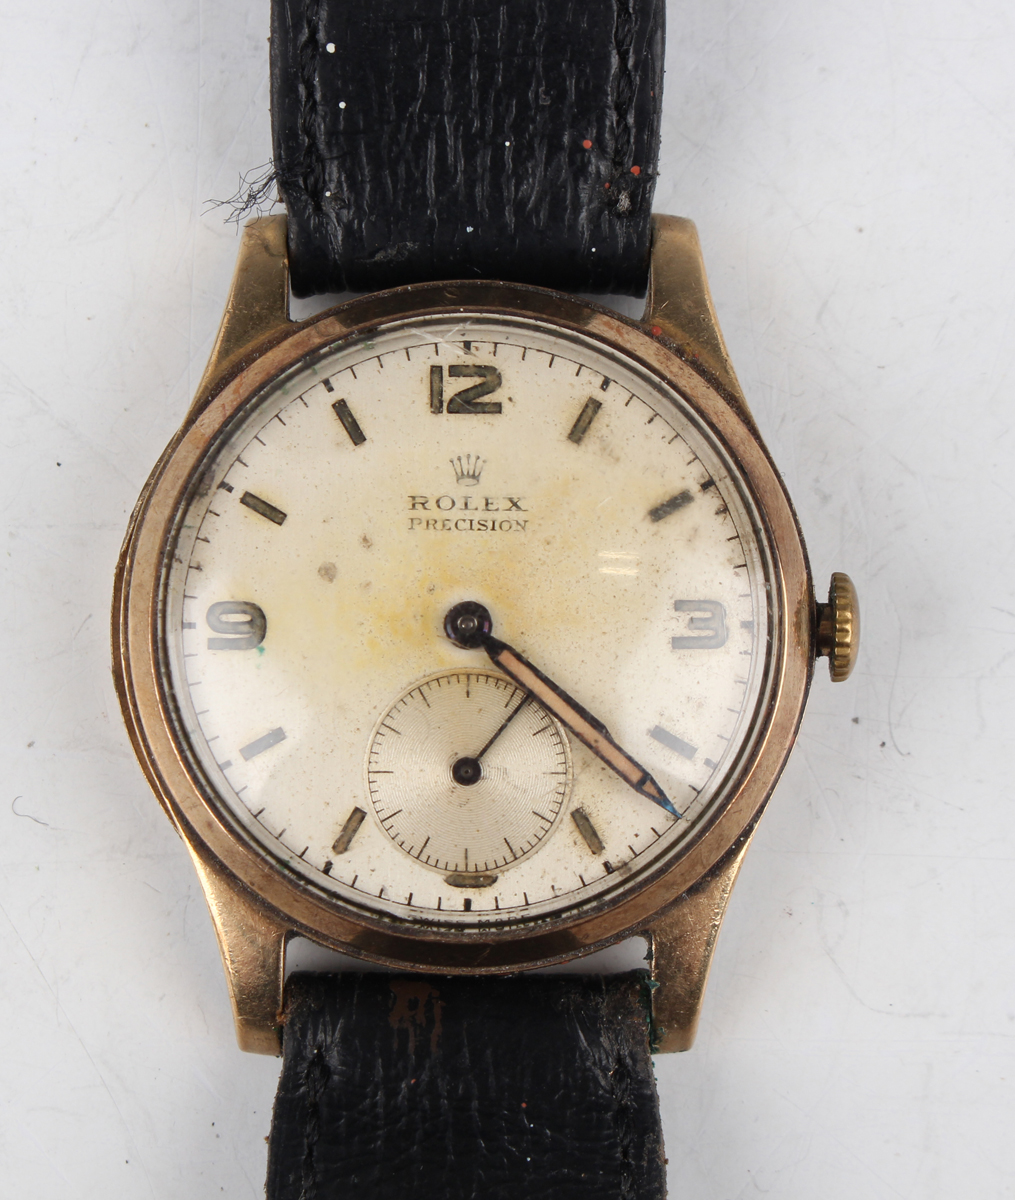 A Rolex Precision 9ct gold circular cased gentleman's wristwatch, Ref. 12325, with signed jewelled